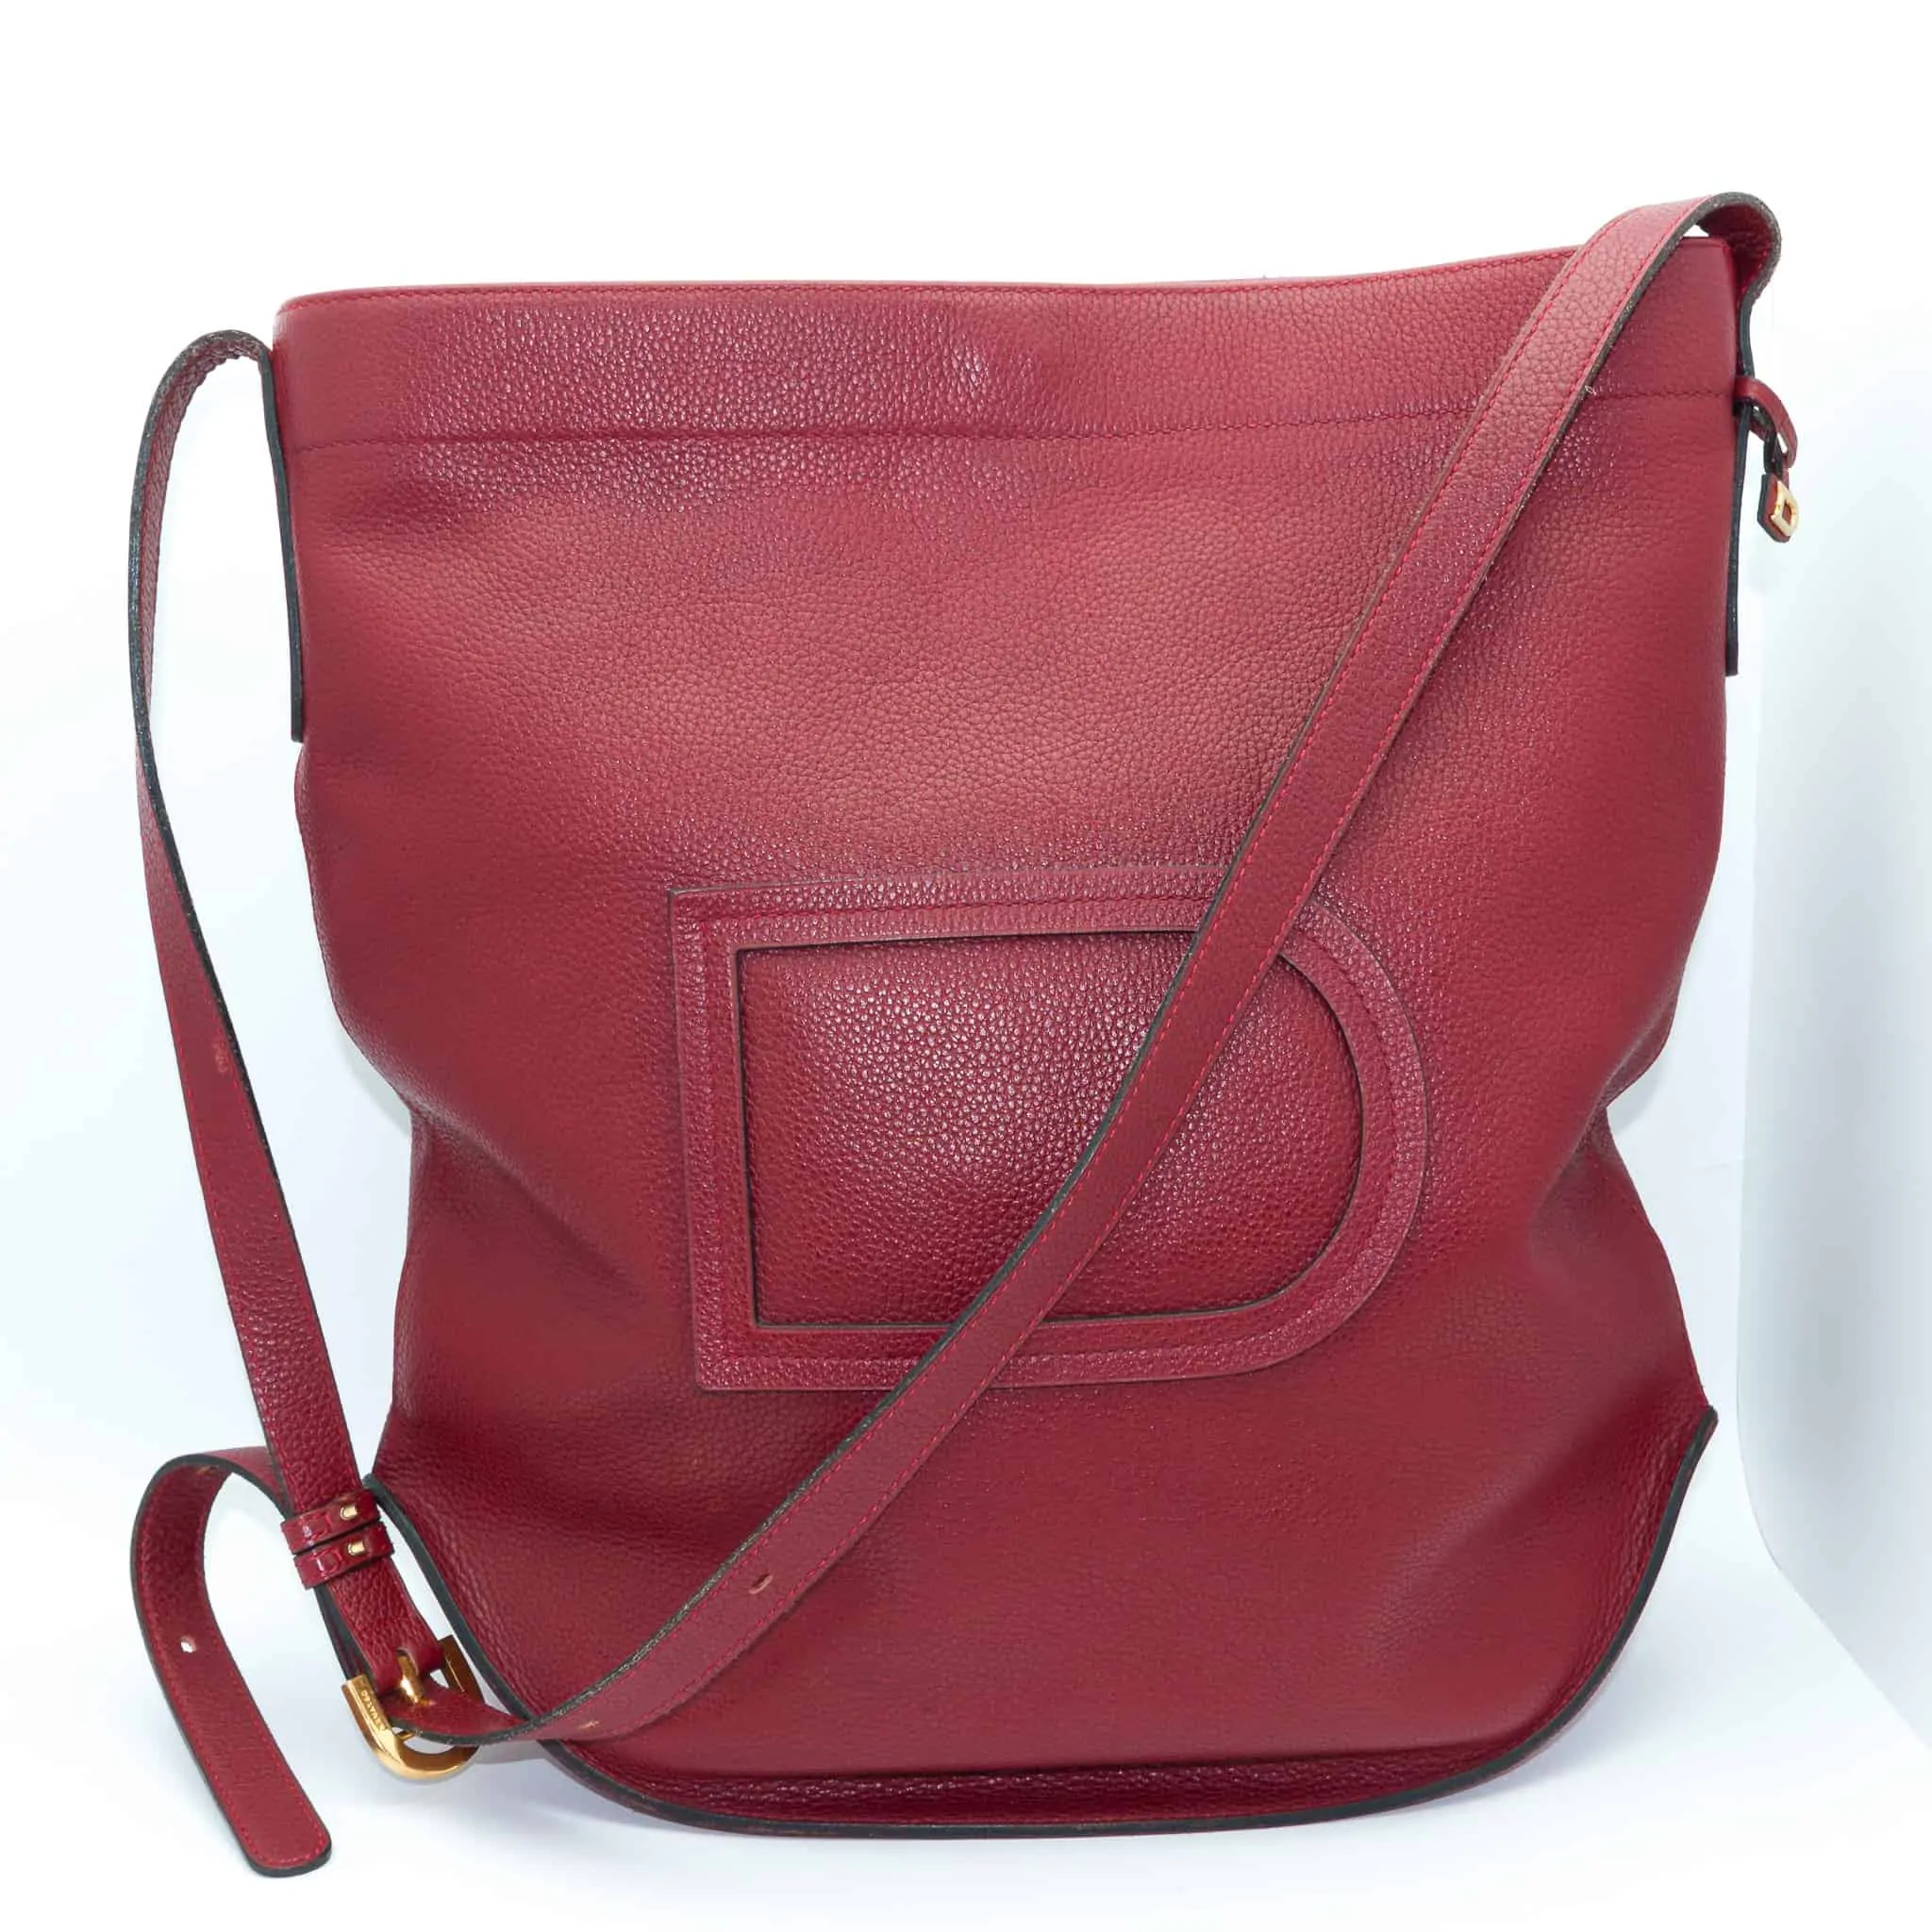 At Auction: 2 leather Delvaux handbags